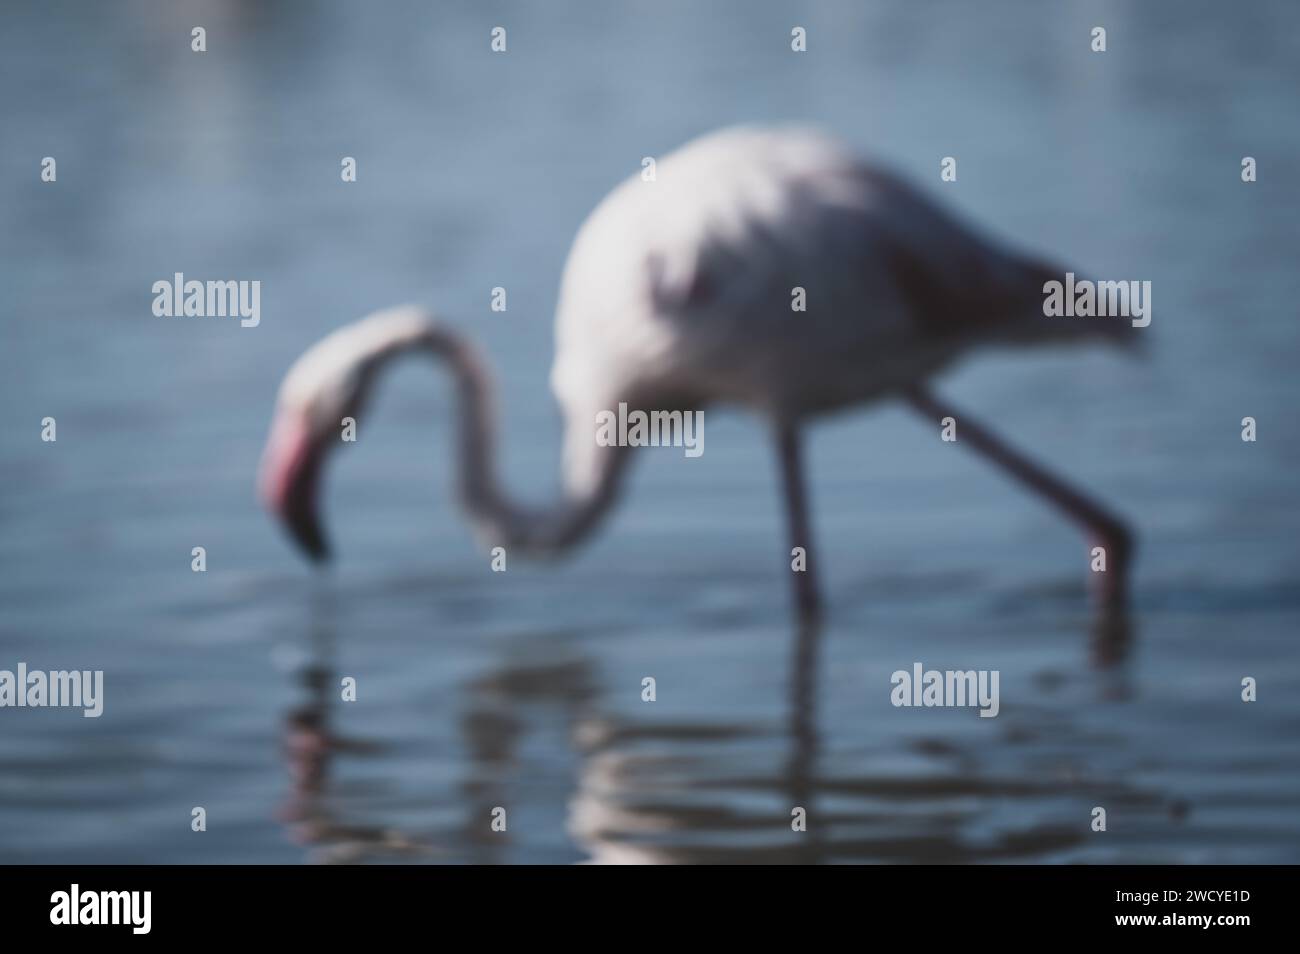 abstract portrait of a lesser flamingo Stock Photo